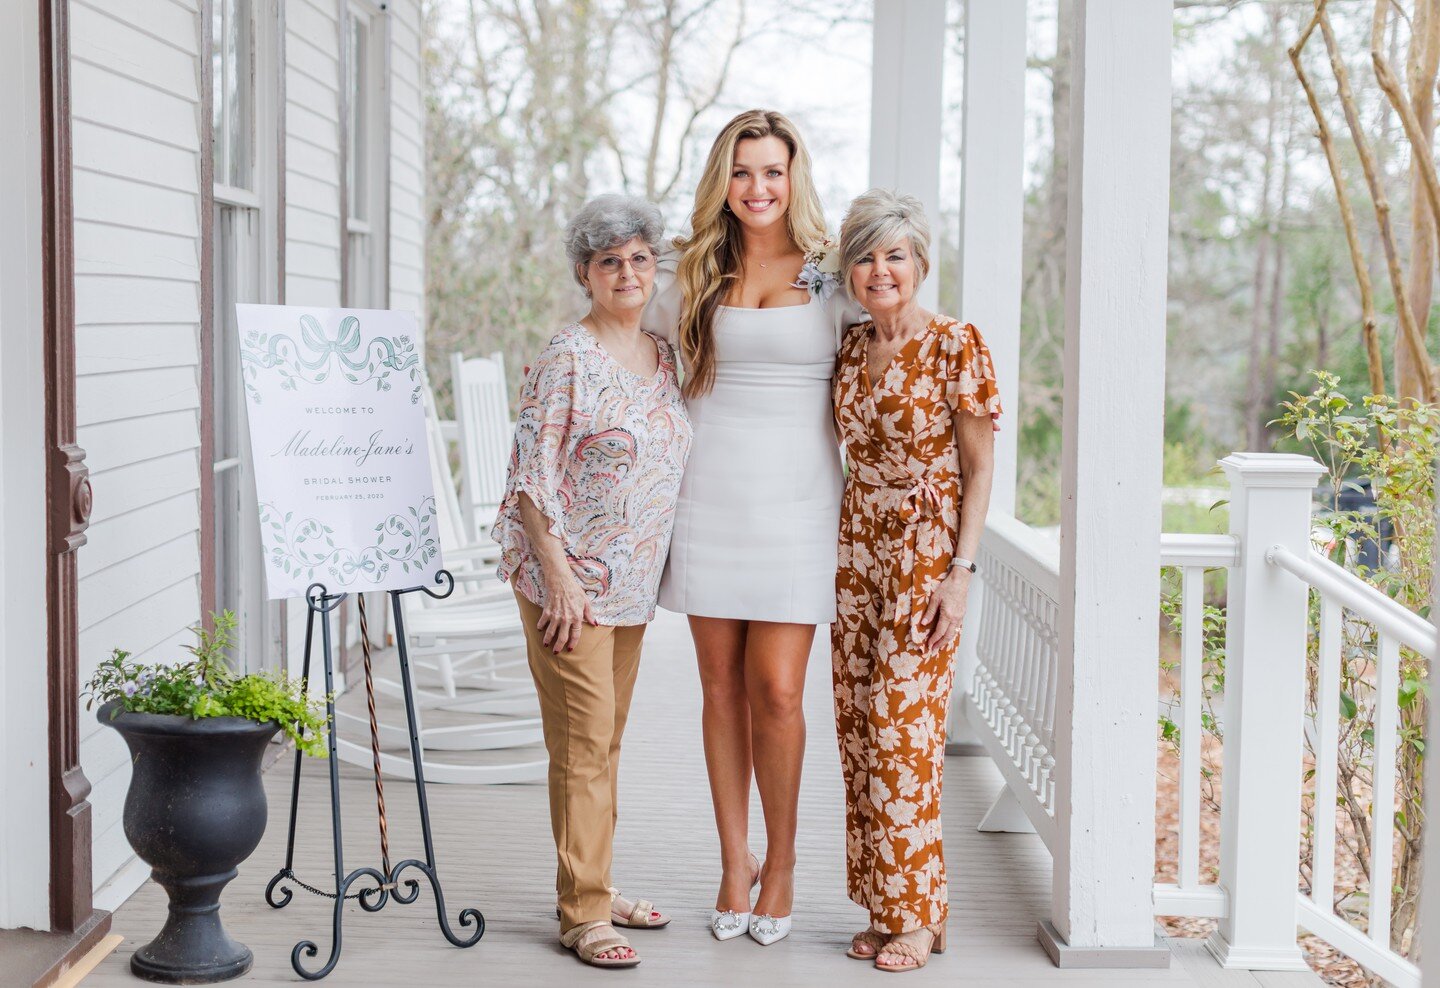 What an honor to capture MJ's beautiful bridal shower this past weekend! I witnessed such a deep loving community of women who are so supportive of MJ and her next chapter in life. Marriage! That countdown has begun! I'm so honored MJ asked me to pla